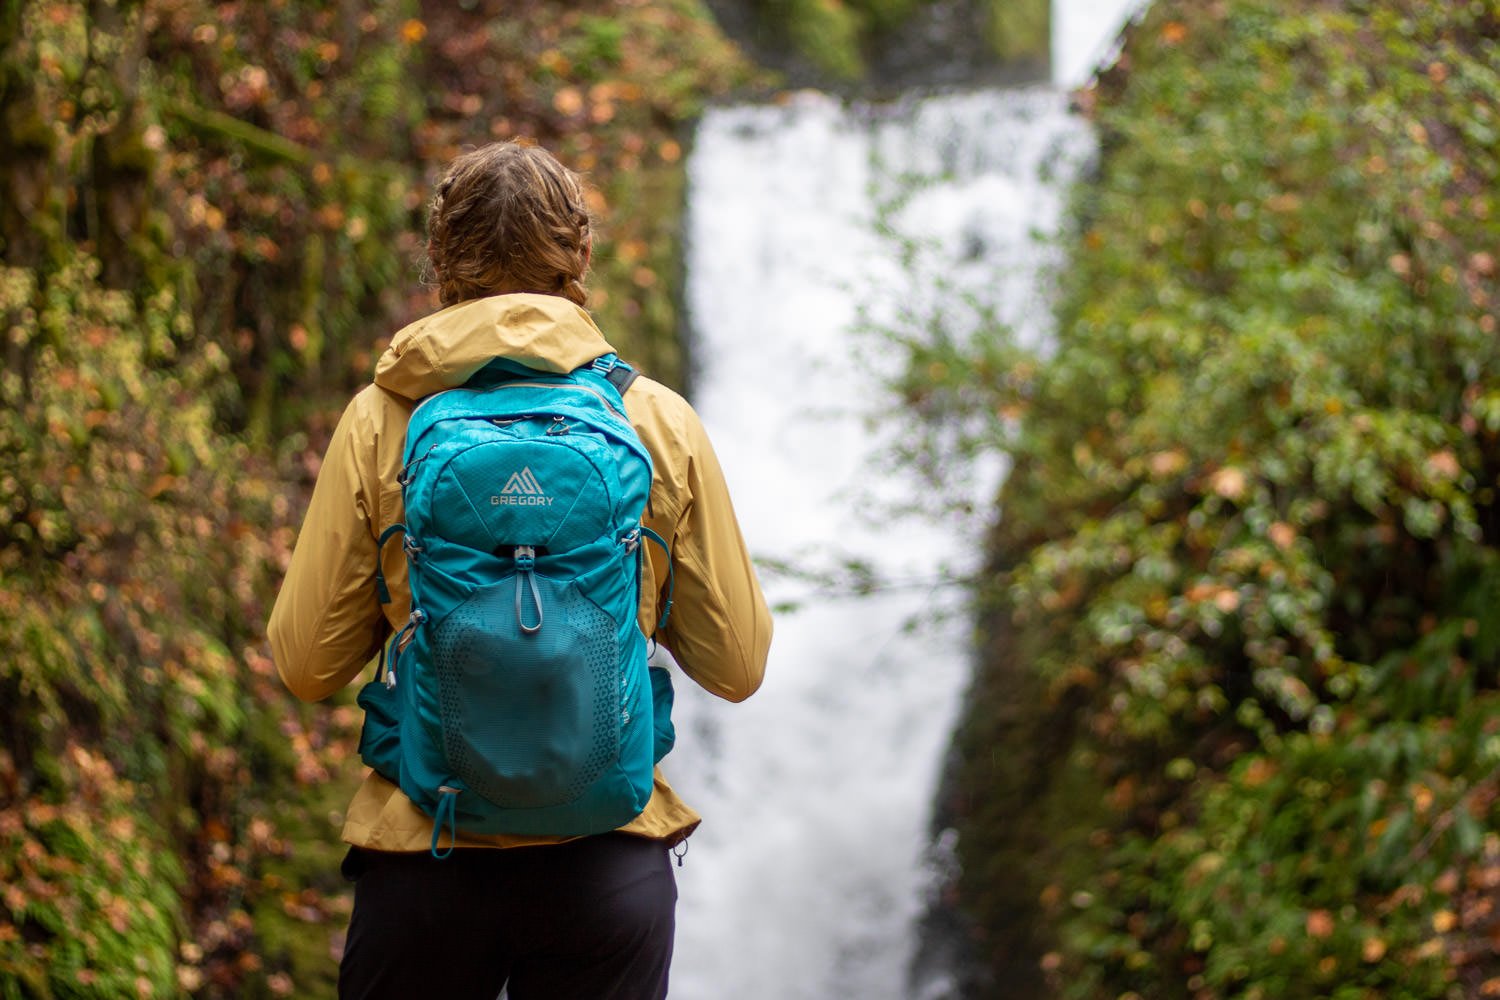 A hiker using the Gregory Juno 24 H20 hydration pack on a waterfall dayhike